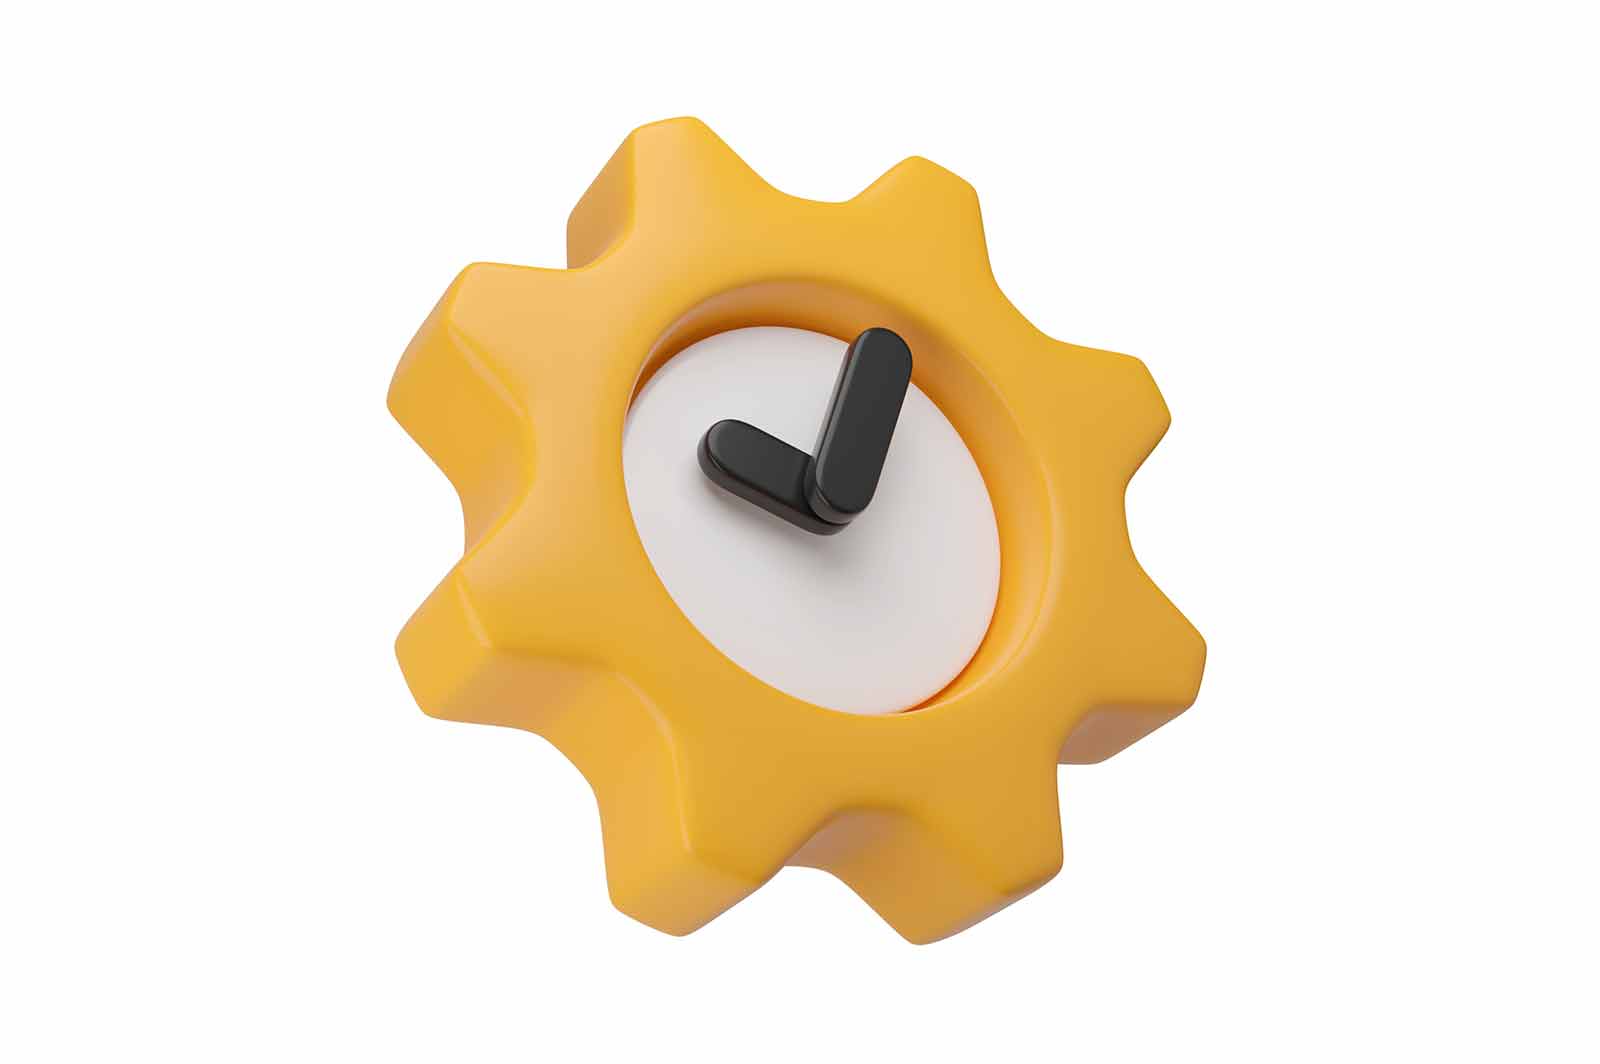 Gear clock is a 3d rendered illustration of a yellow gear shaped clock with a white face and black hands. It indicates 12 o’clock, the start or end of a cycle. It represents the concept of time, mechanism, or efficiency.